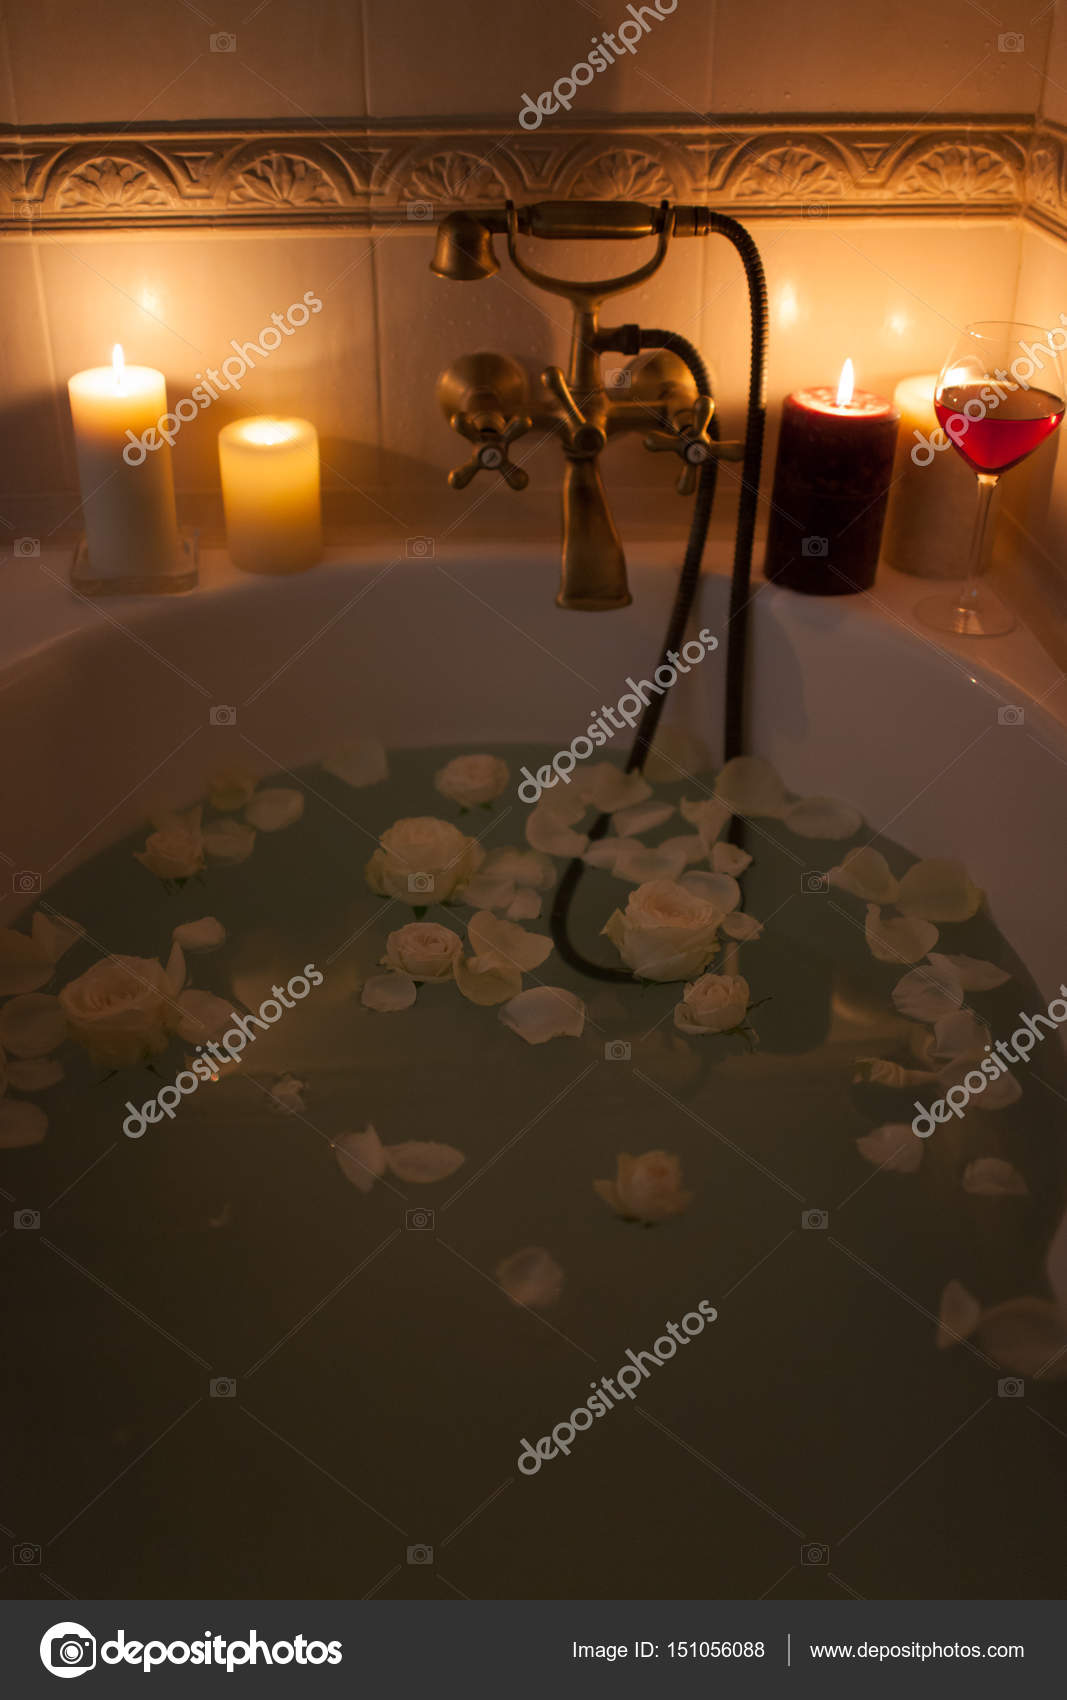 Romantic Bedroom Candles Take A Bath With Rose Petals And